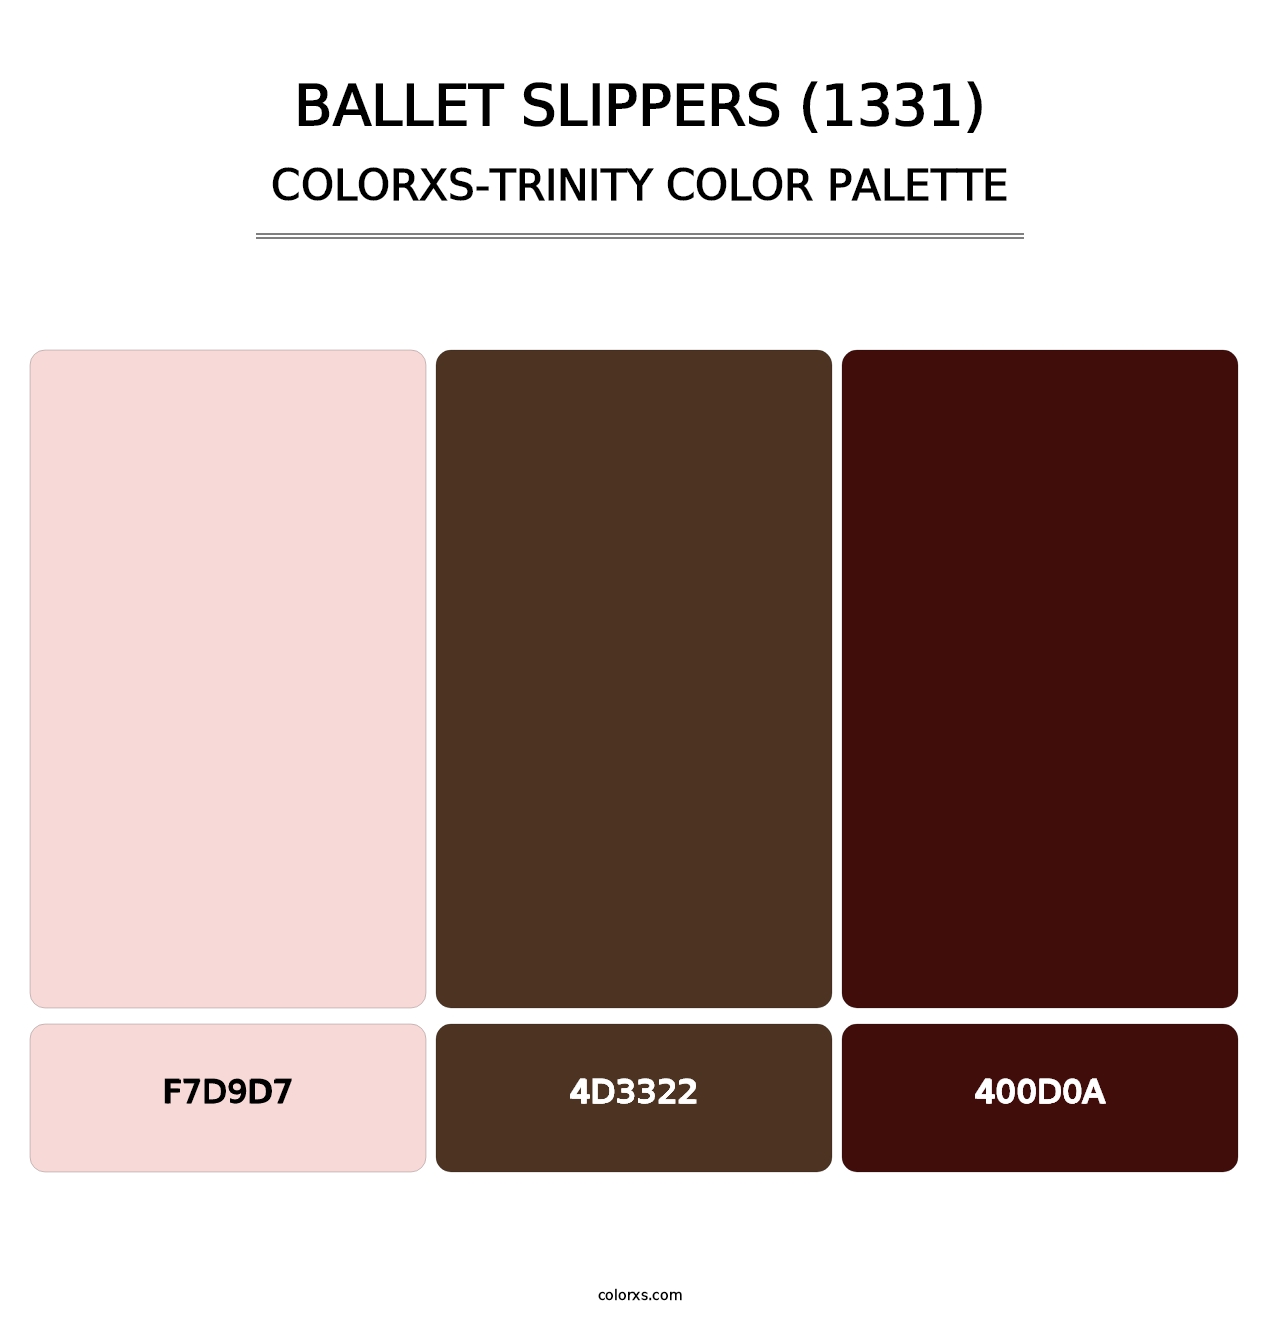 Ballet Slippers (1331) - Colorxs Trinity Palette